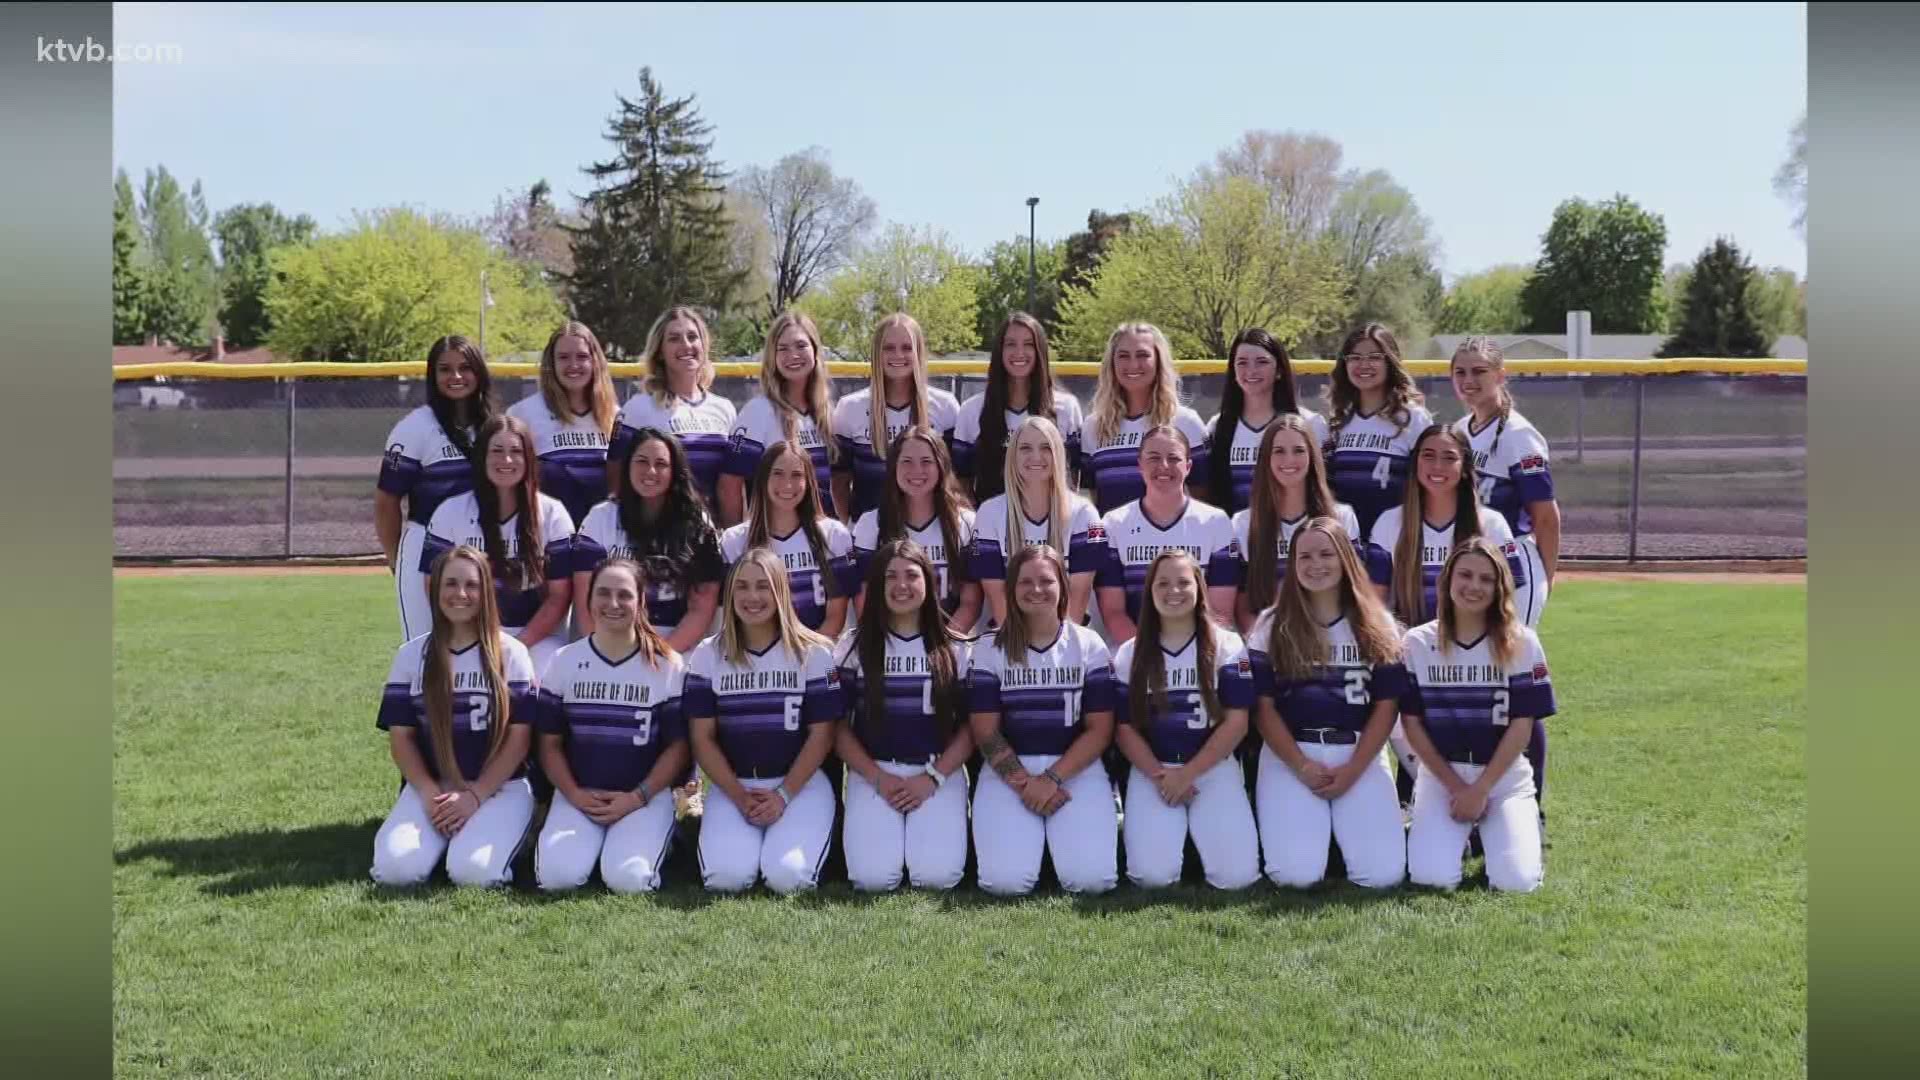 Women's softball off to Nationals